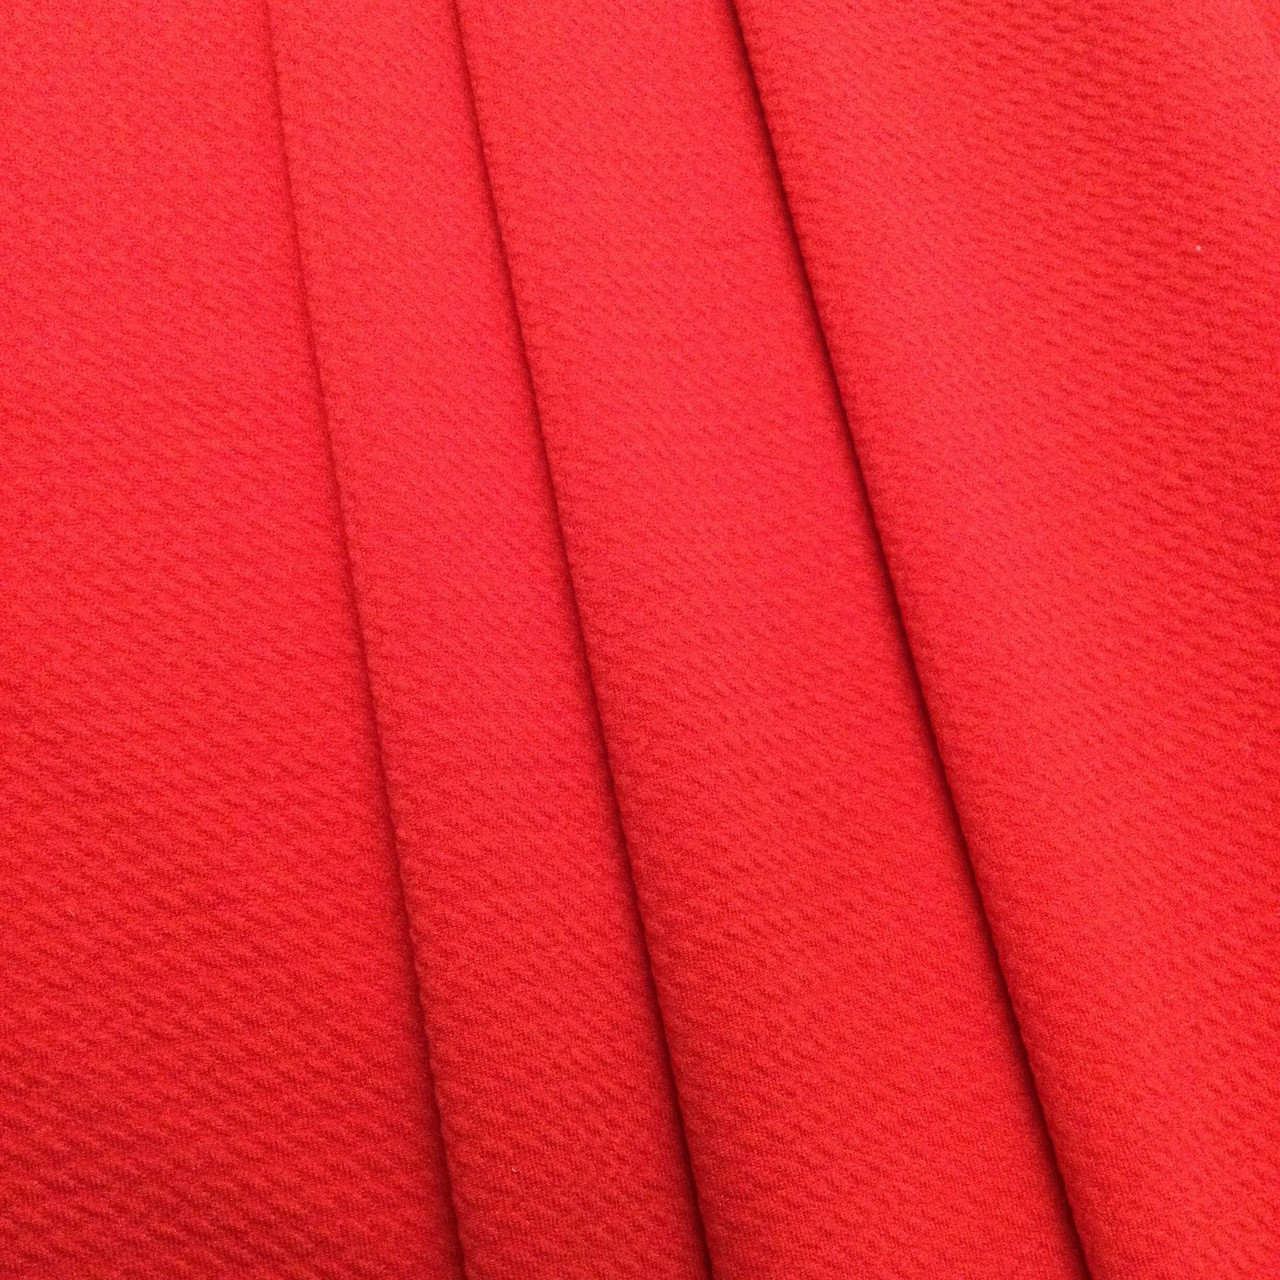 4 Way Stretch Lycra Polyester Spandex Knit Fabric for Dancer Activewear Diy  150x50cm - sold by the